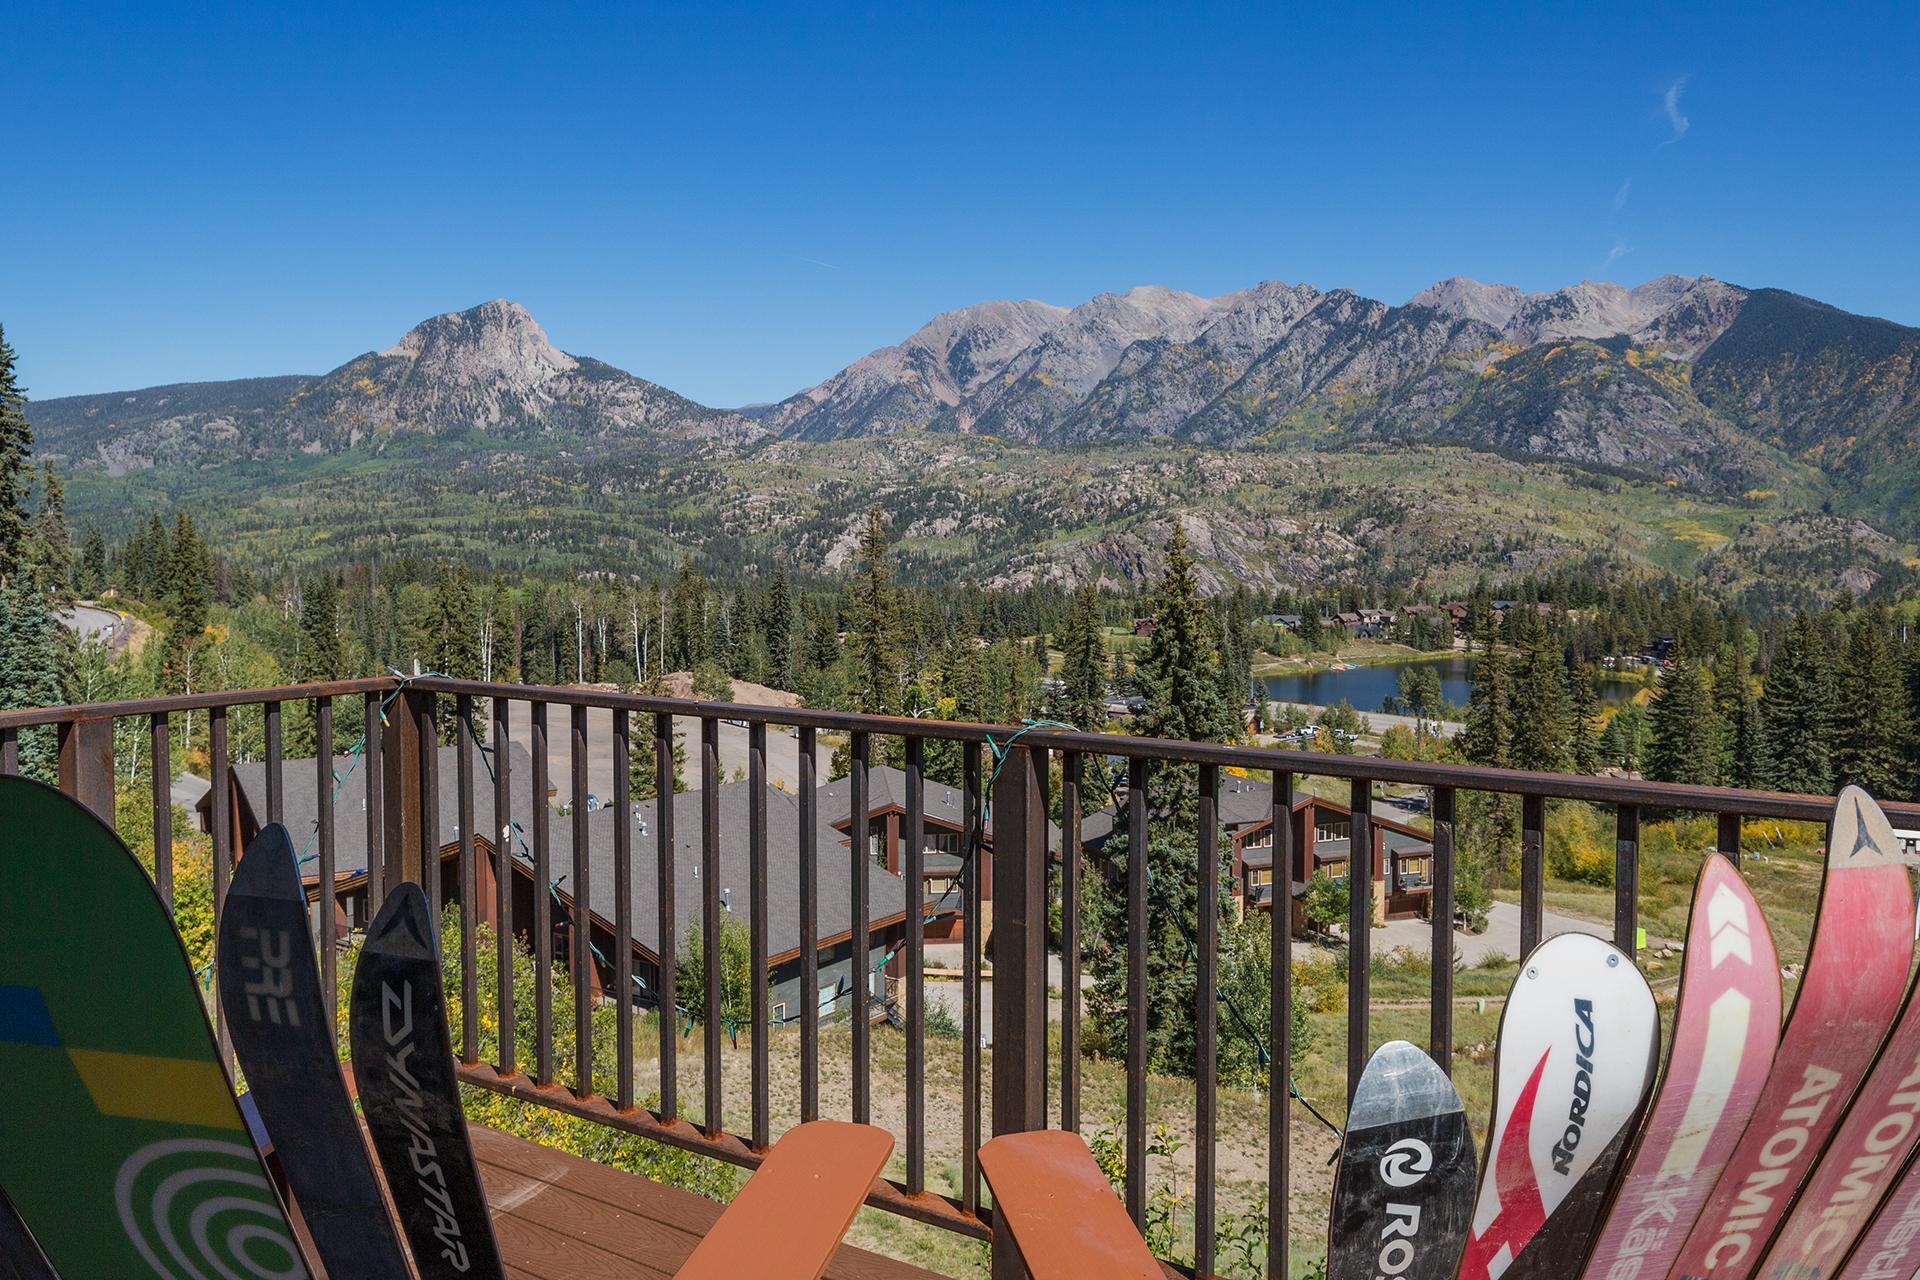 Awesome views of Spud Mountain and the Needles Range from the deck off the main living space